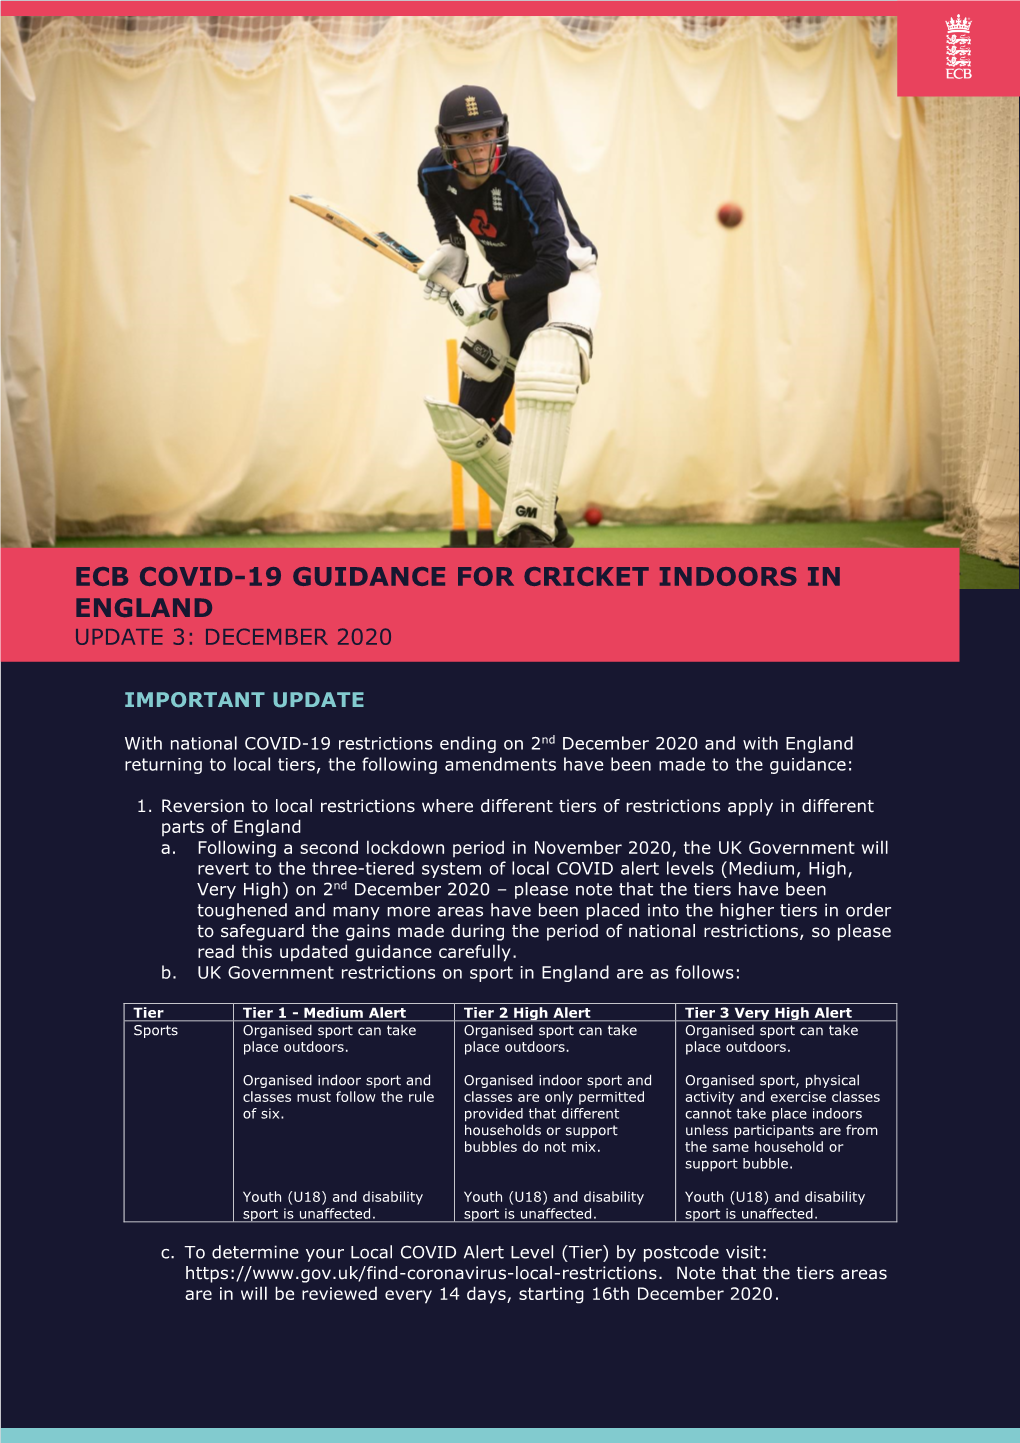 Ecb Covid-19 Guidance for Cricket Indoors In